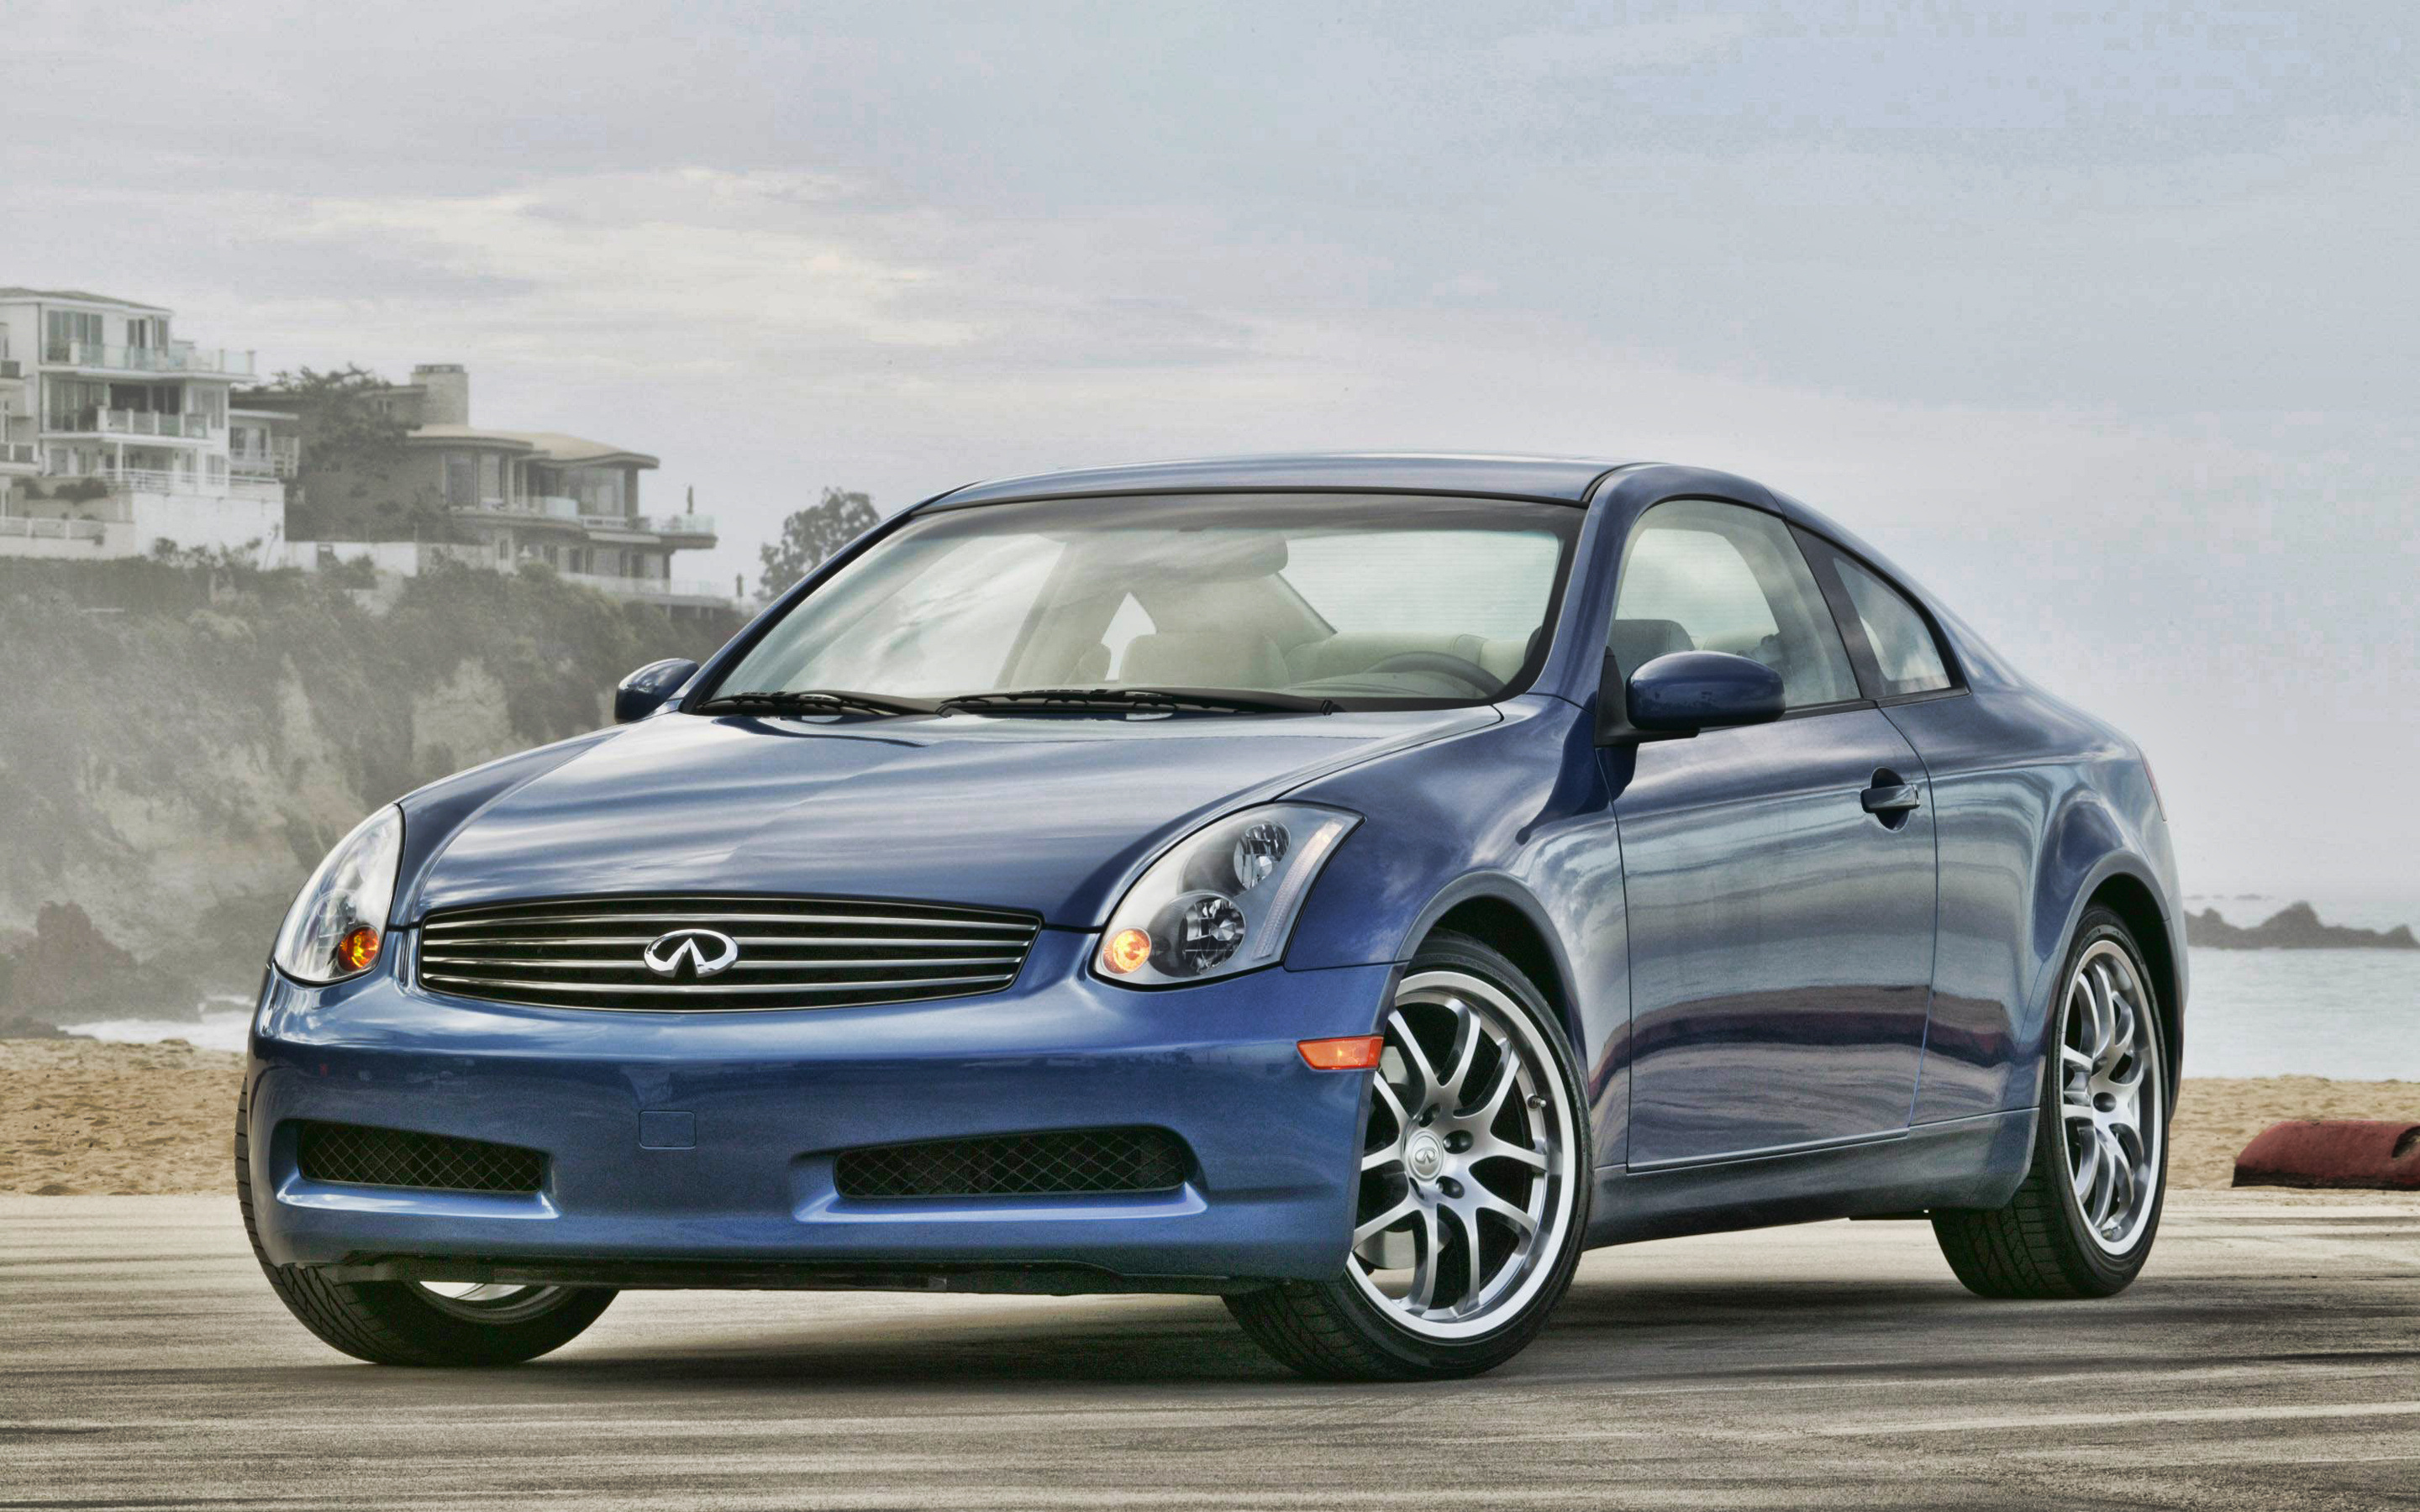 Infiniti G35 Coupe, Luxury car wallpapers, Japanese automotive excellence, High-quality pictures, 2880x1800 HD Desktop